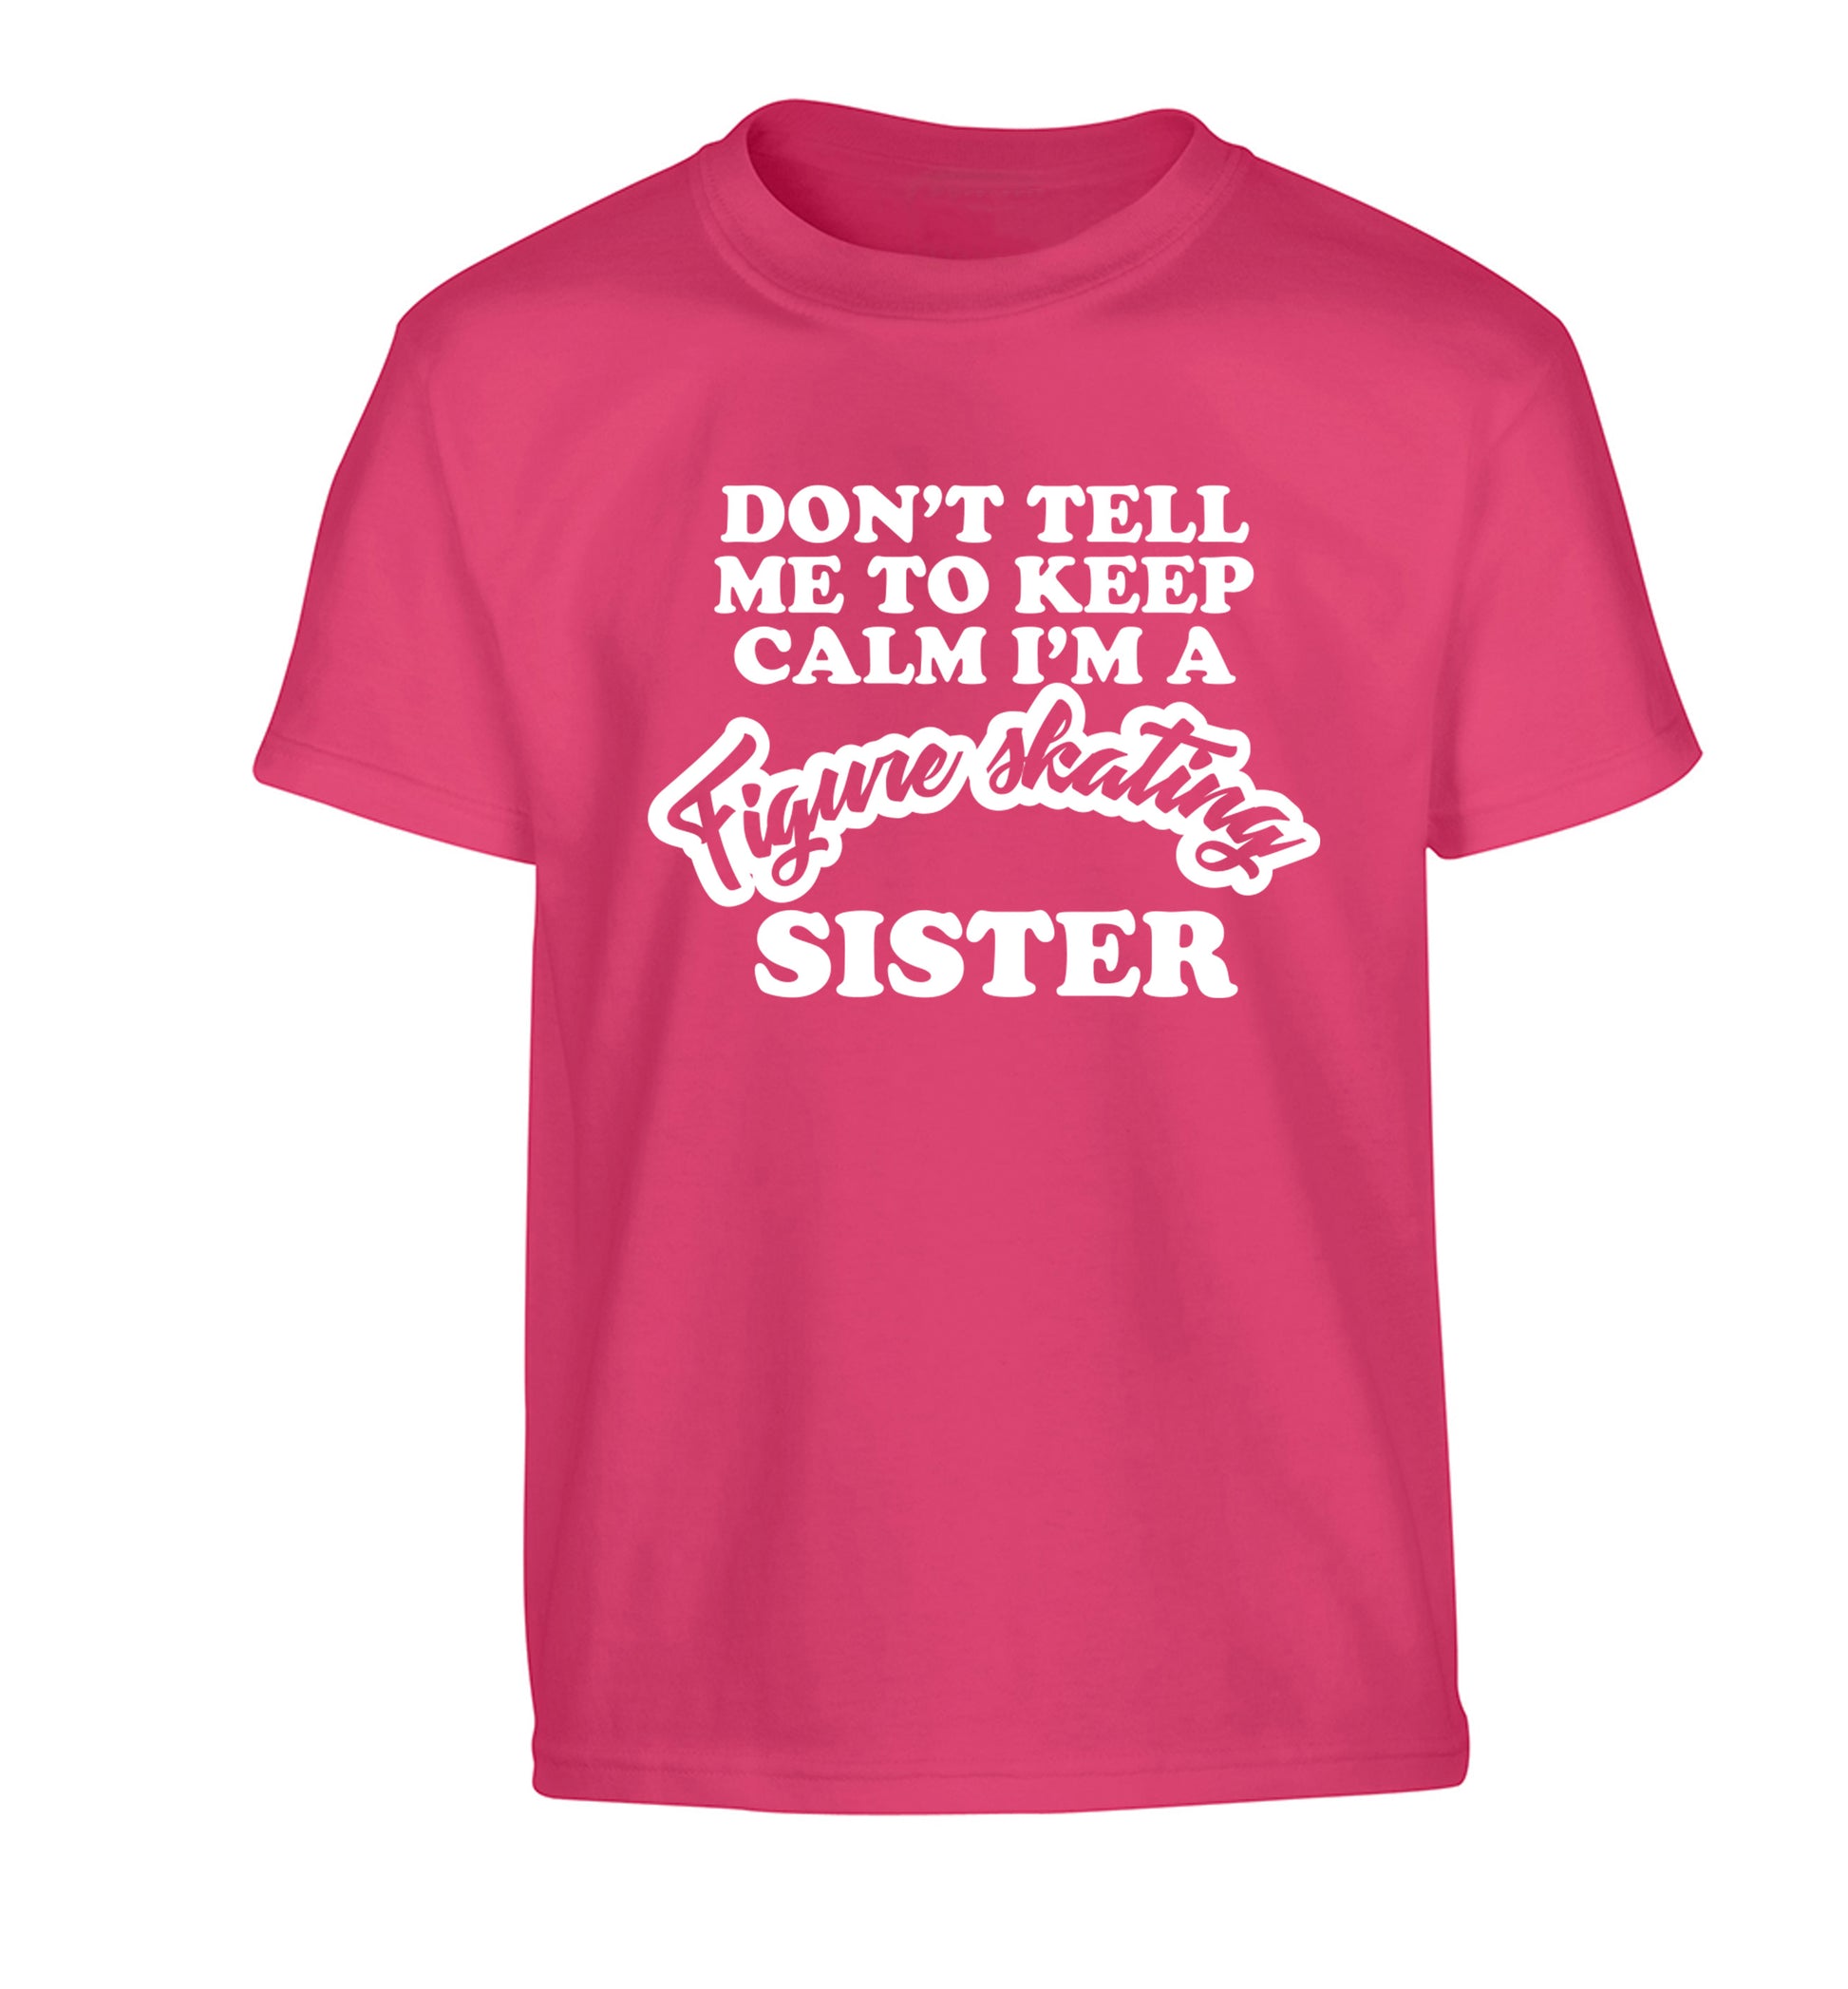 Don't tell me to keep calm I'm a figure skating sister Children's pink Tshirt 12-14 Years